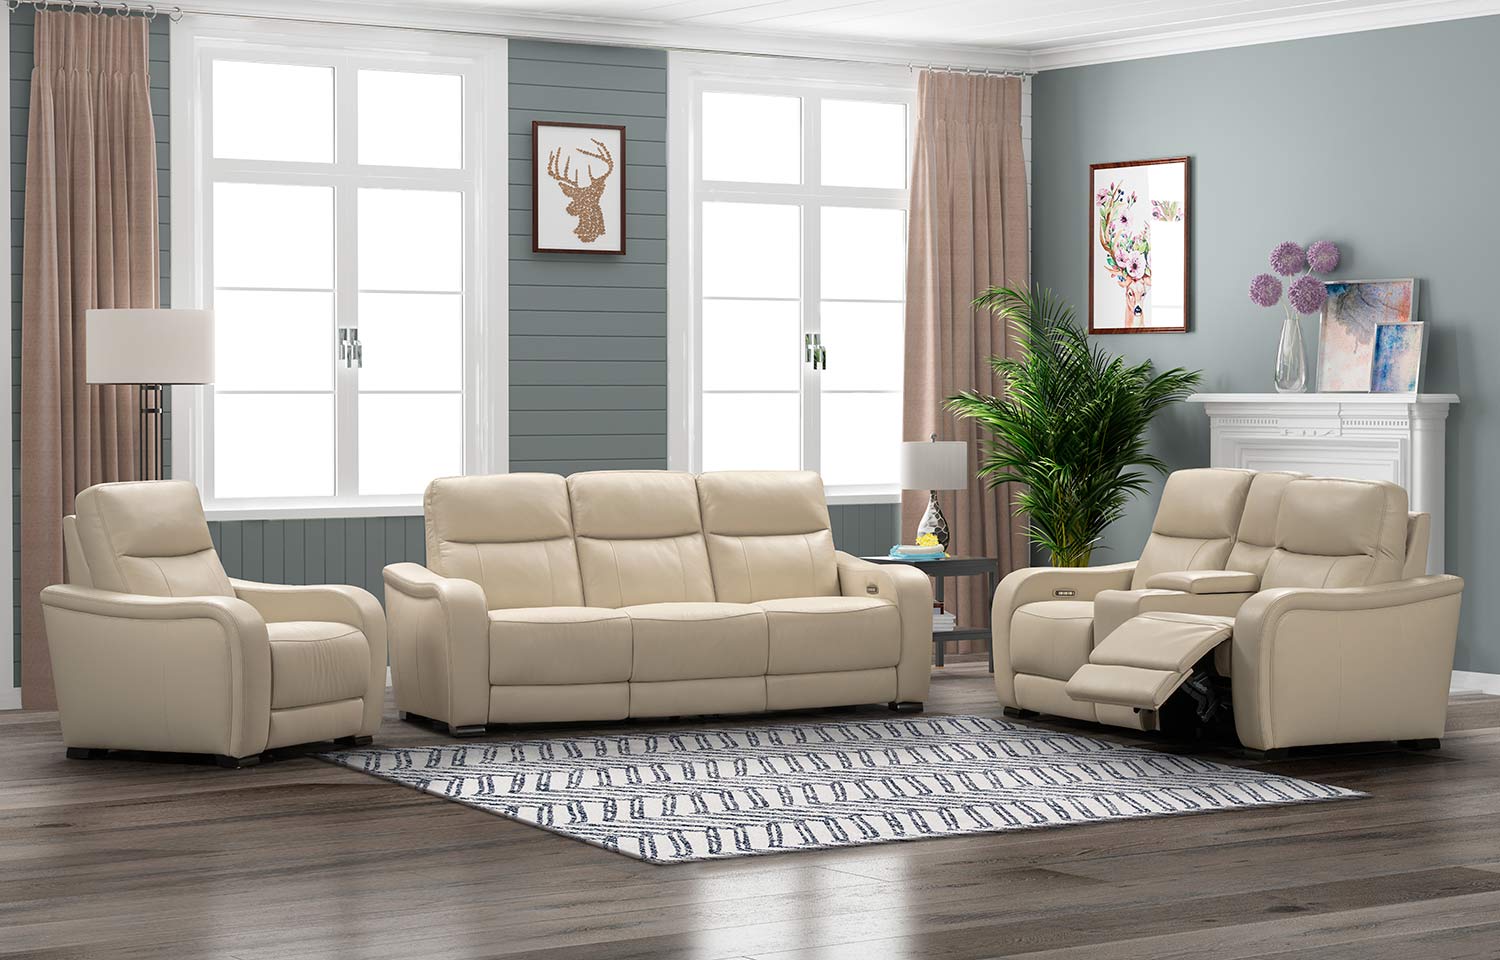 Barcalounger Electra Power Reclining Sofa Set with Power Head Rests and Power Lumbar - Laurel Cream/Leather Match